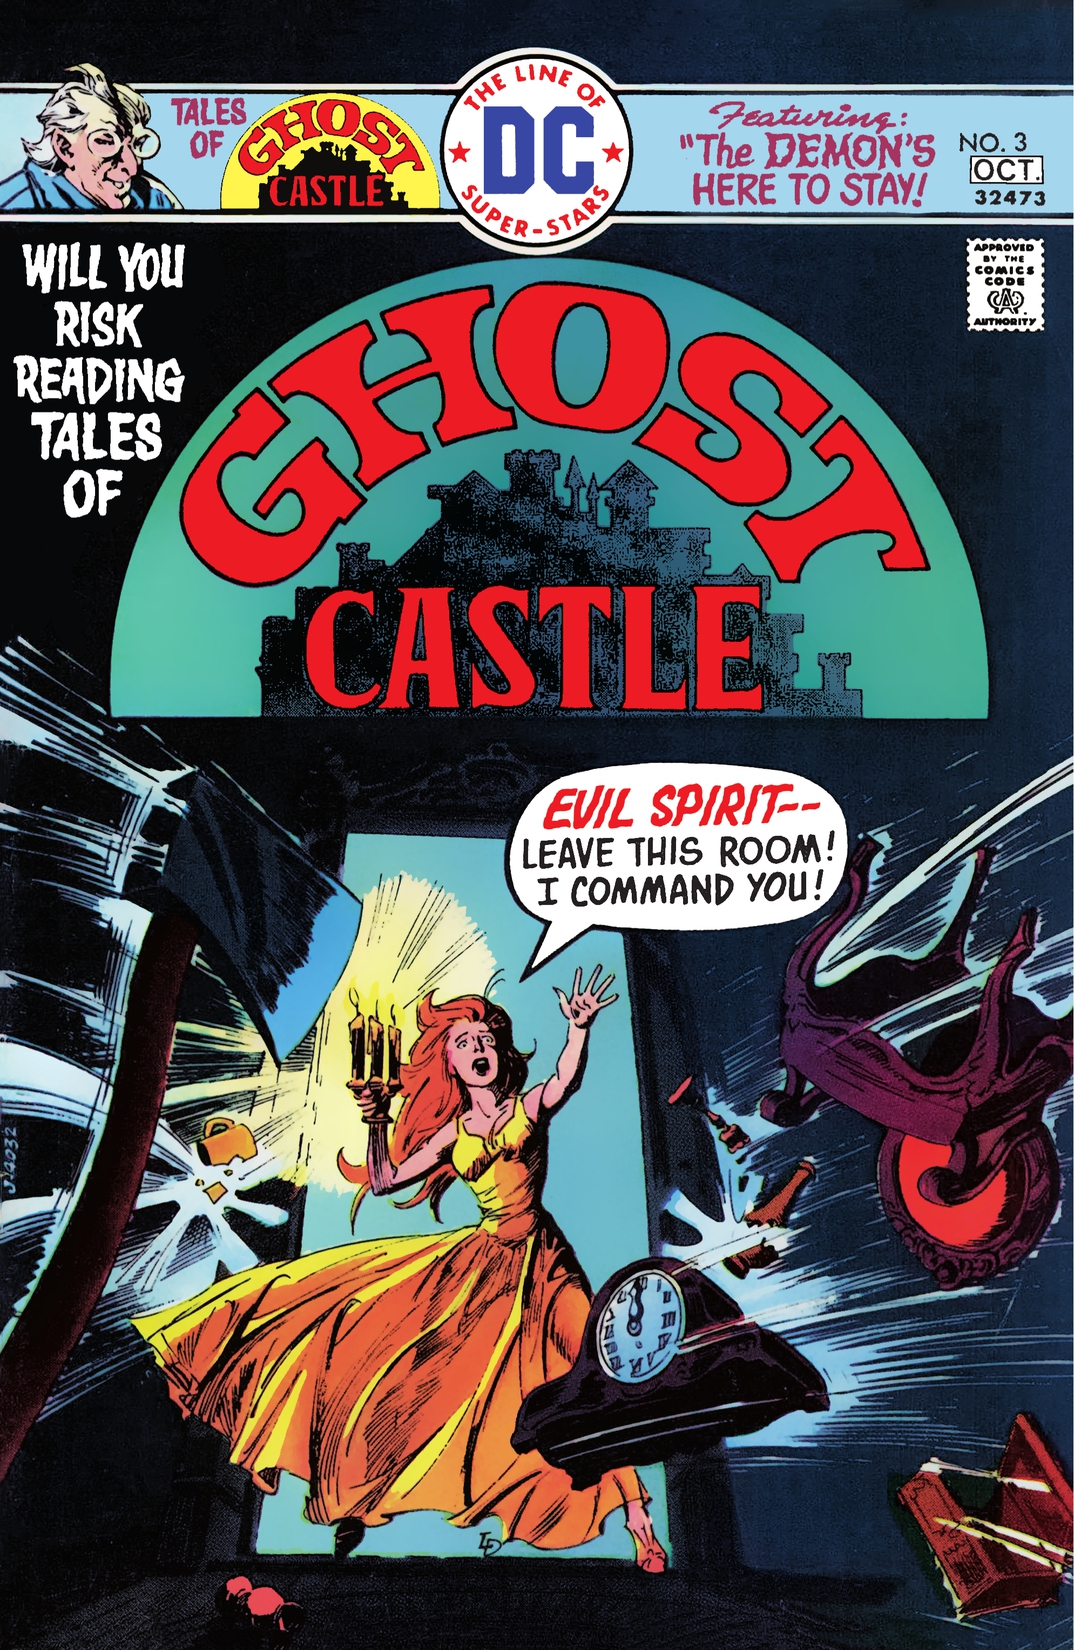 Tales of Ghost Castle #3 preview images